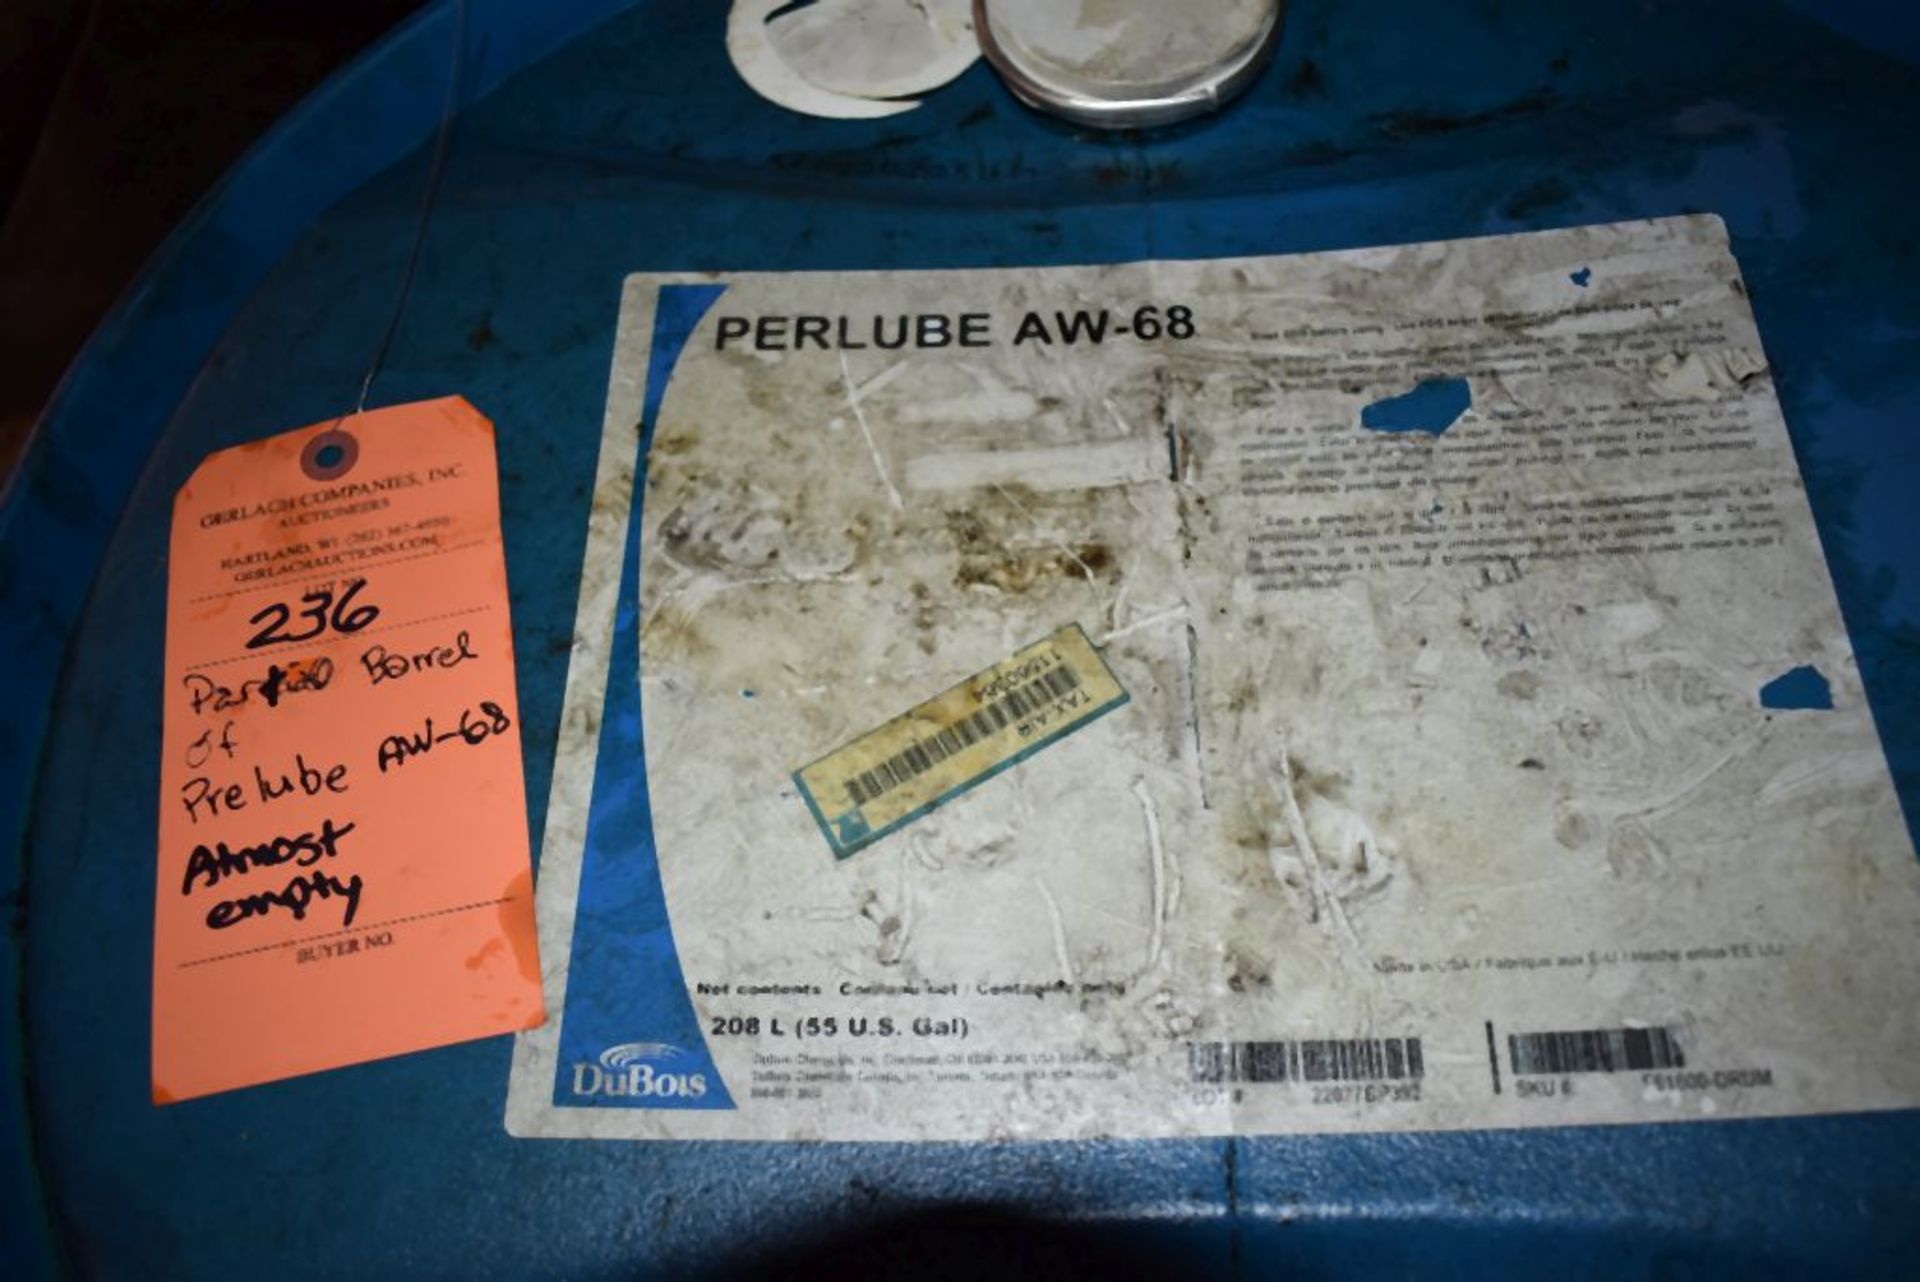 PARTIAL BARREL OF PRELUBE AW-68, ALMOST EMPTY - Image 2 of 2